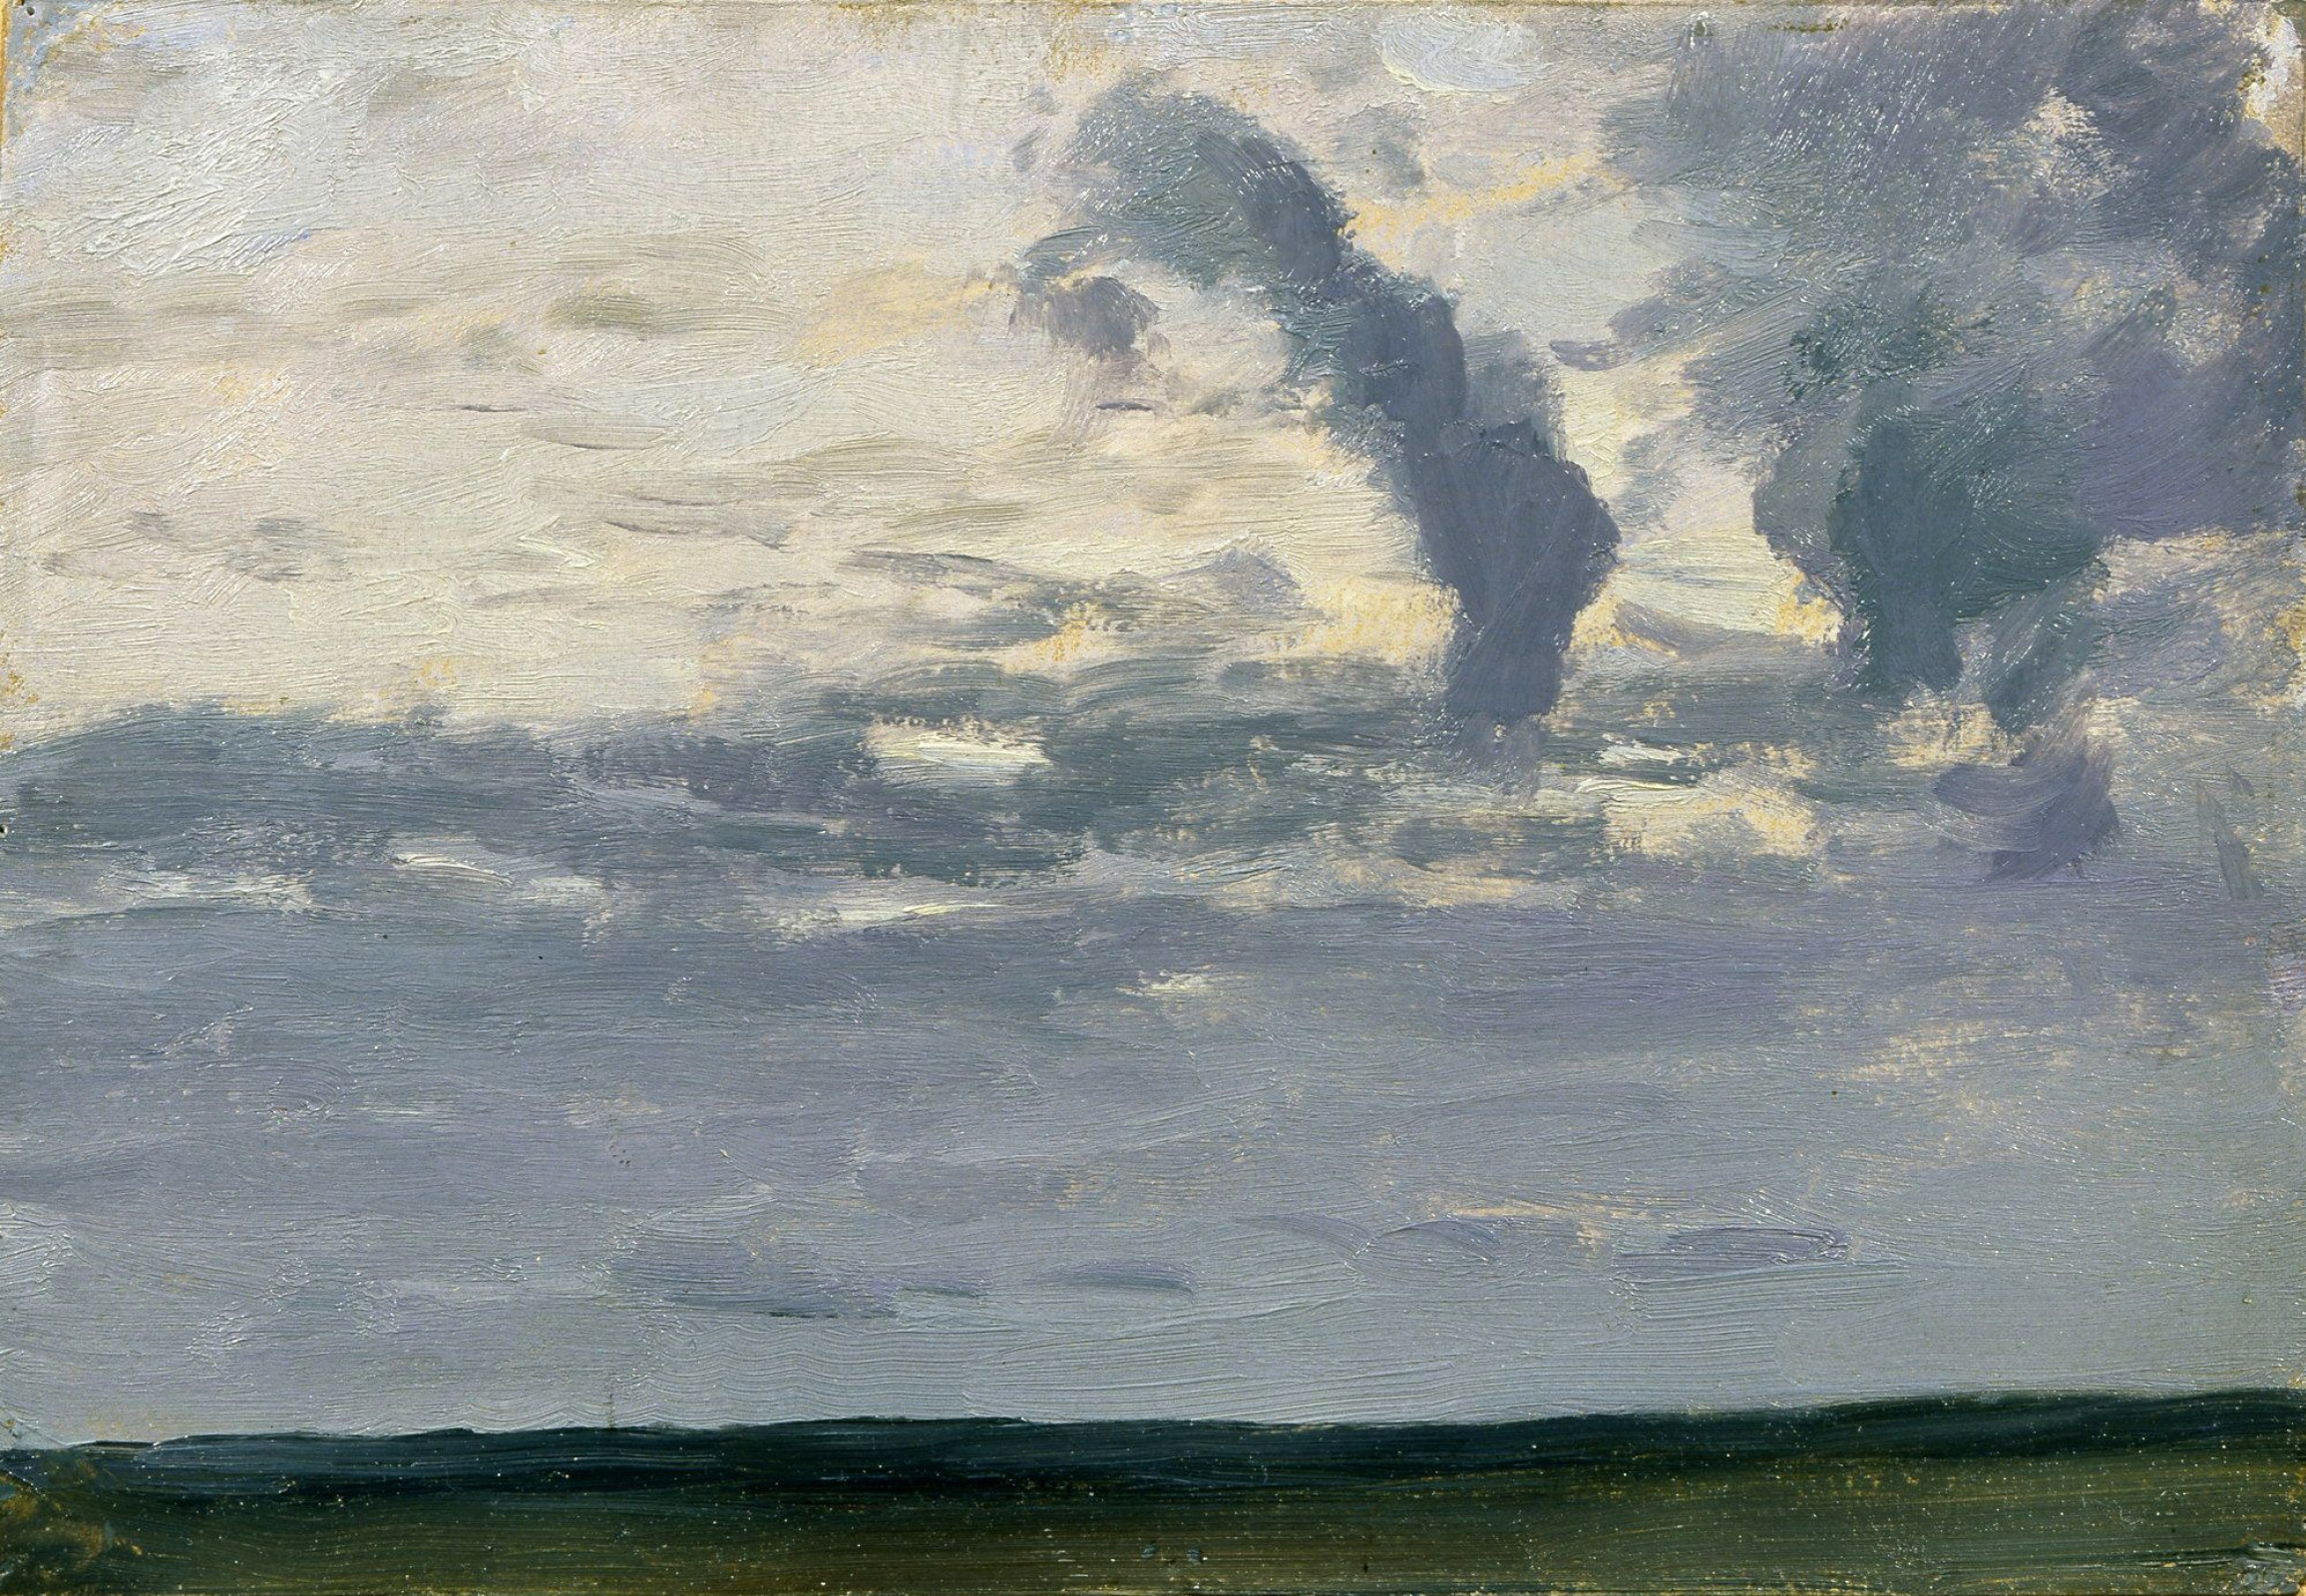 Cloudy Sky Twilight A Sketch For The Painting Eternal Rest 13 26 17 Cm By Isaac Levitan History Analysis Facts Arthive